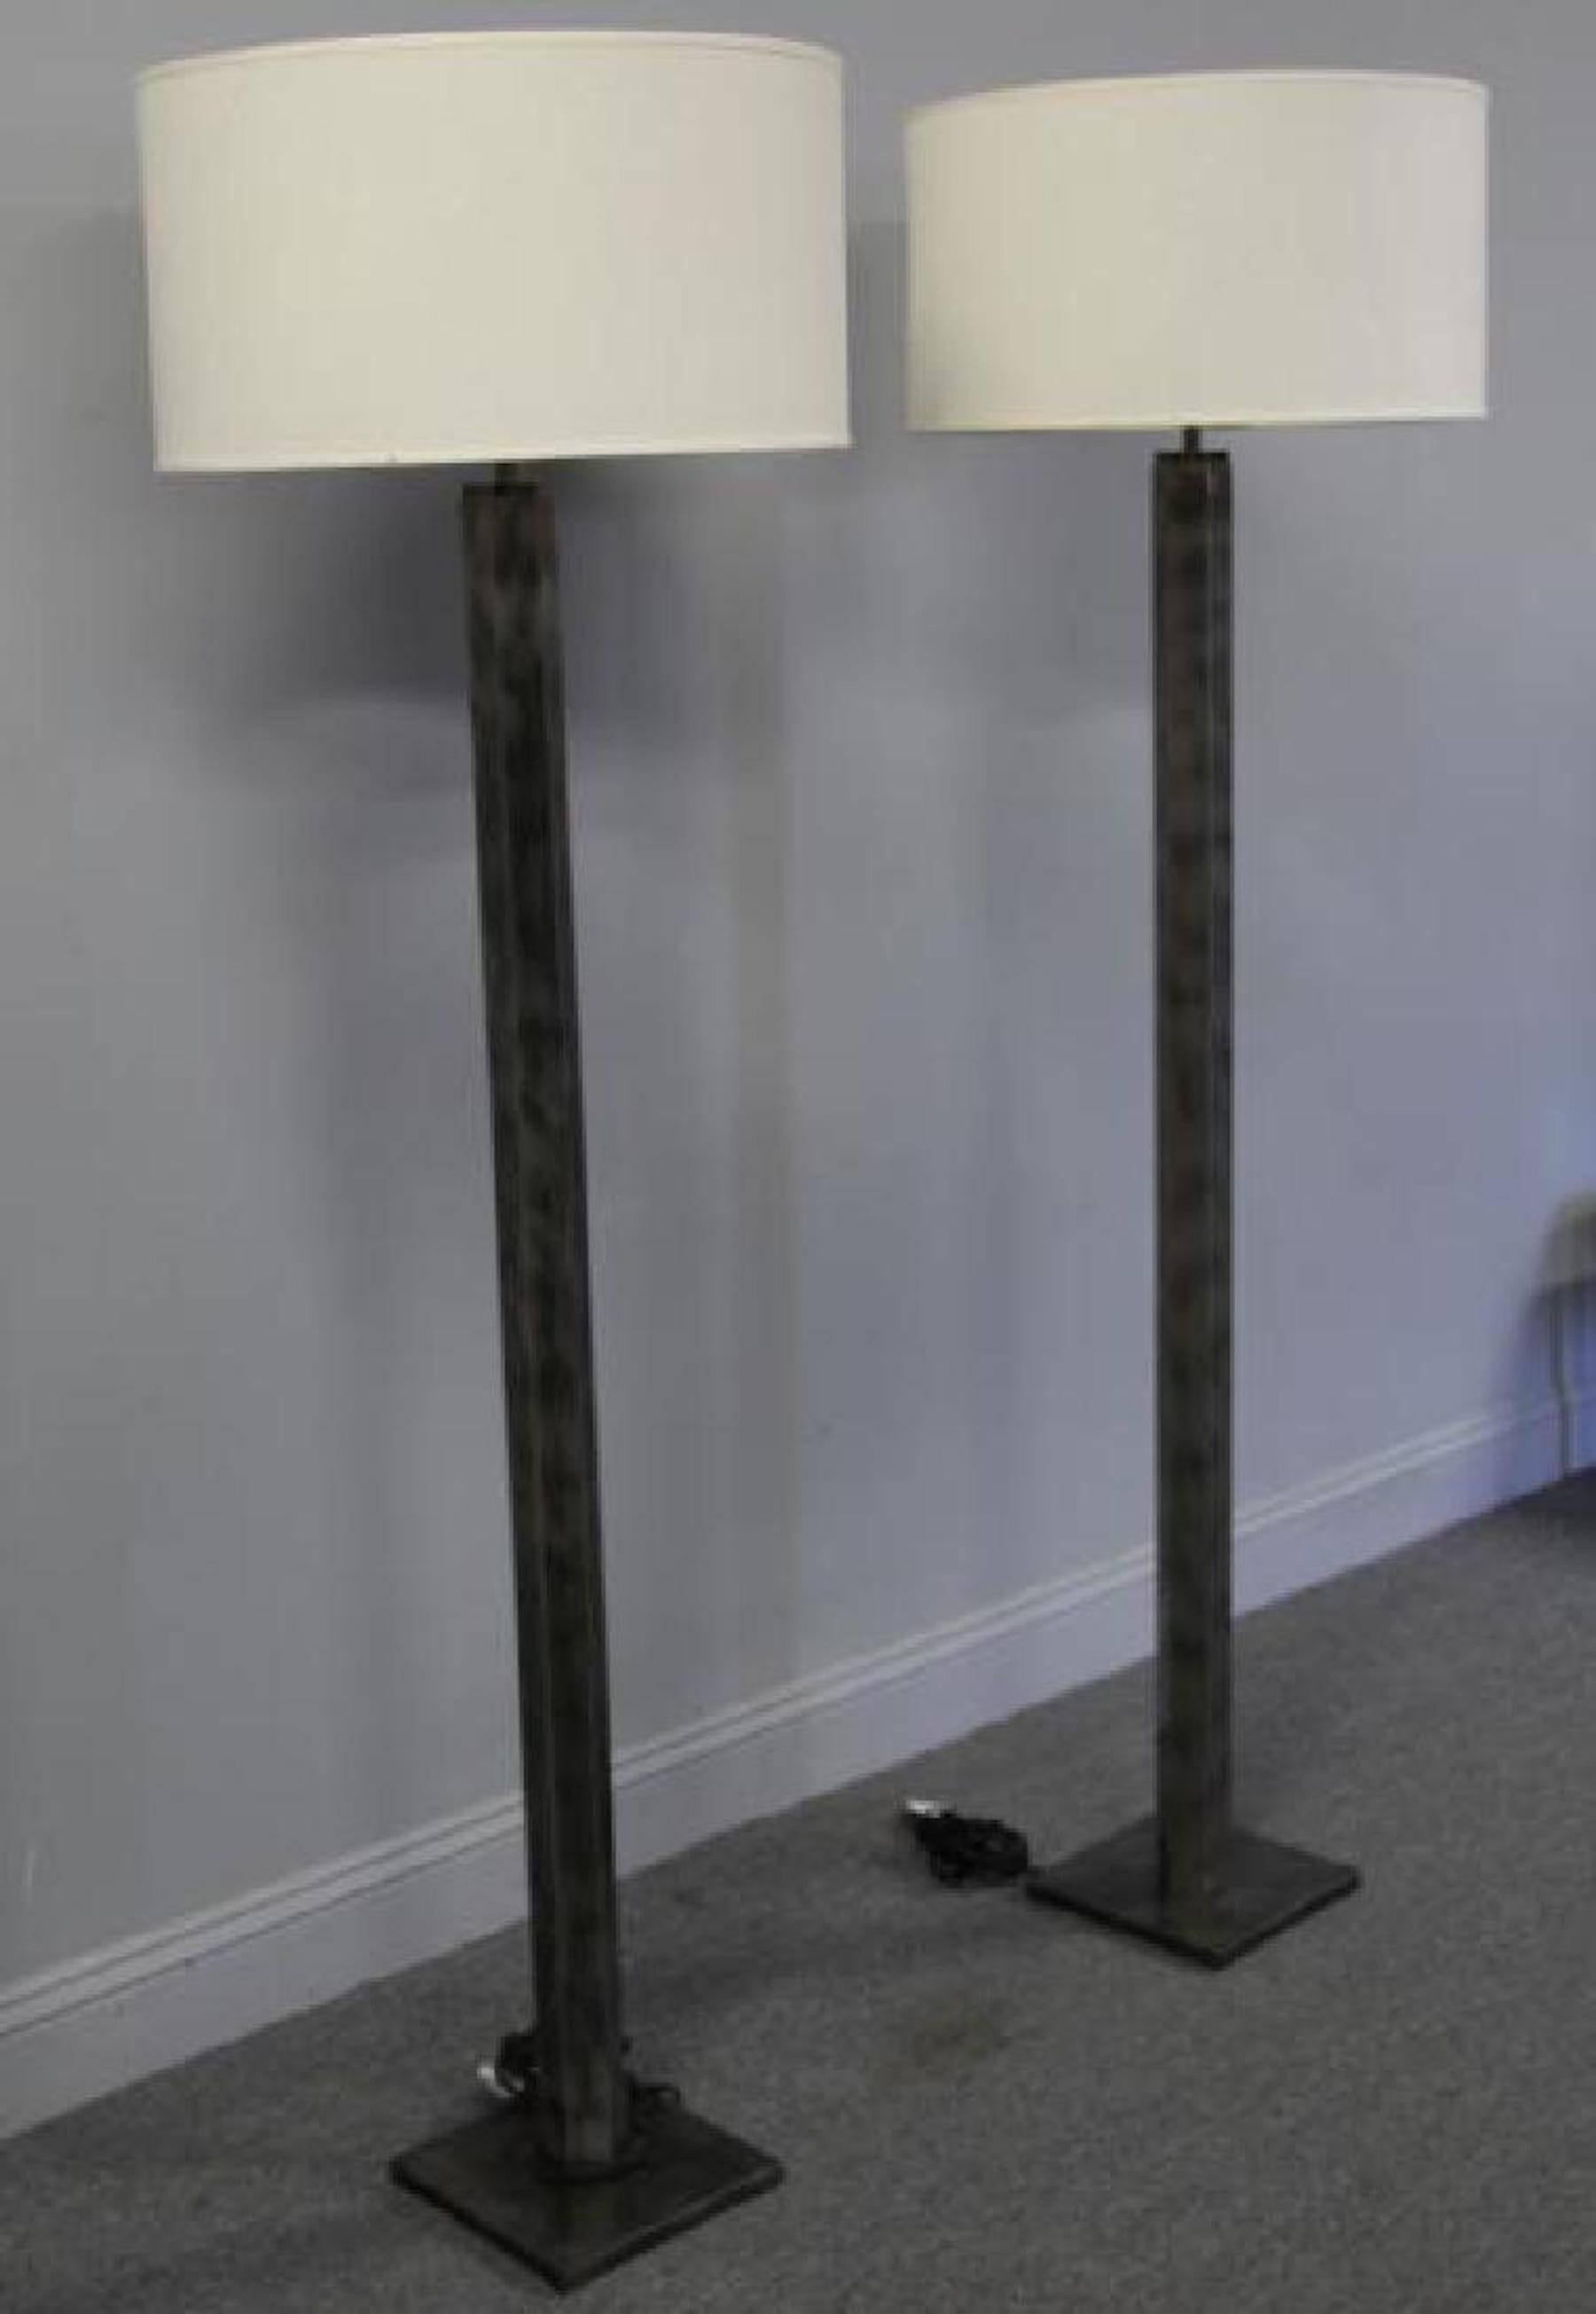 Pair of Industrial steel floor lamps, each one of good weight and nicely cast, with a 9.5 inch square pedestal base. Shades are for display purposes only.
Shown with 21